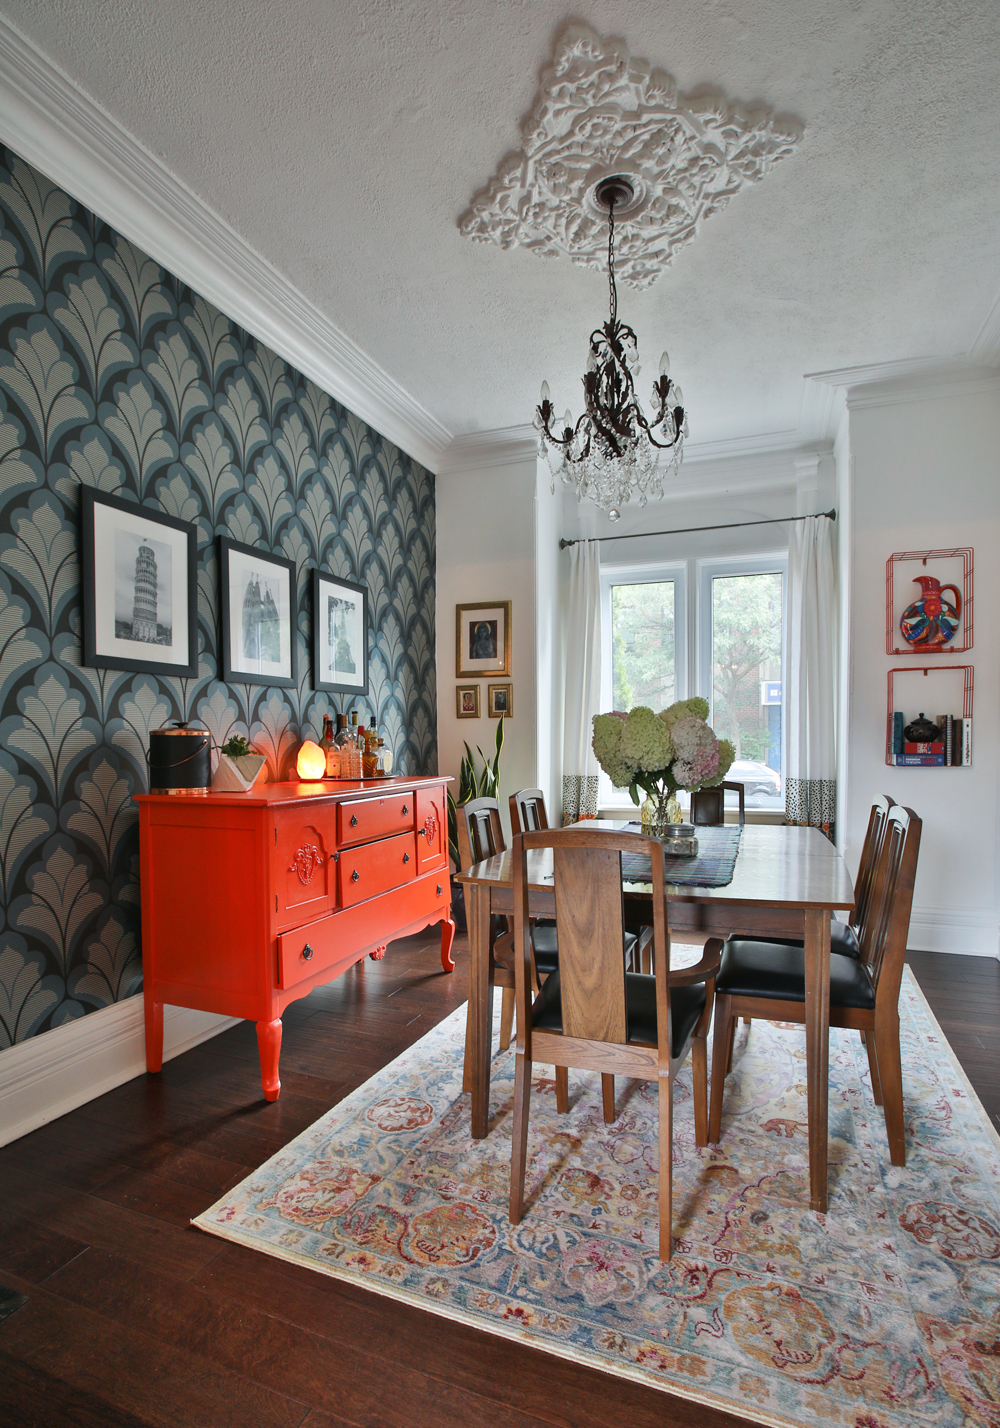 Dining room with orange sideboard and patterned wallpaper